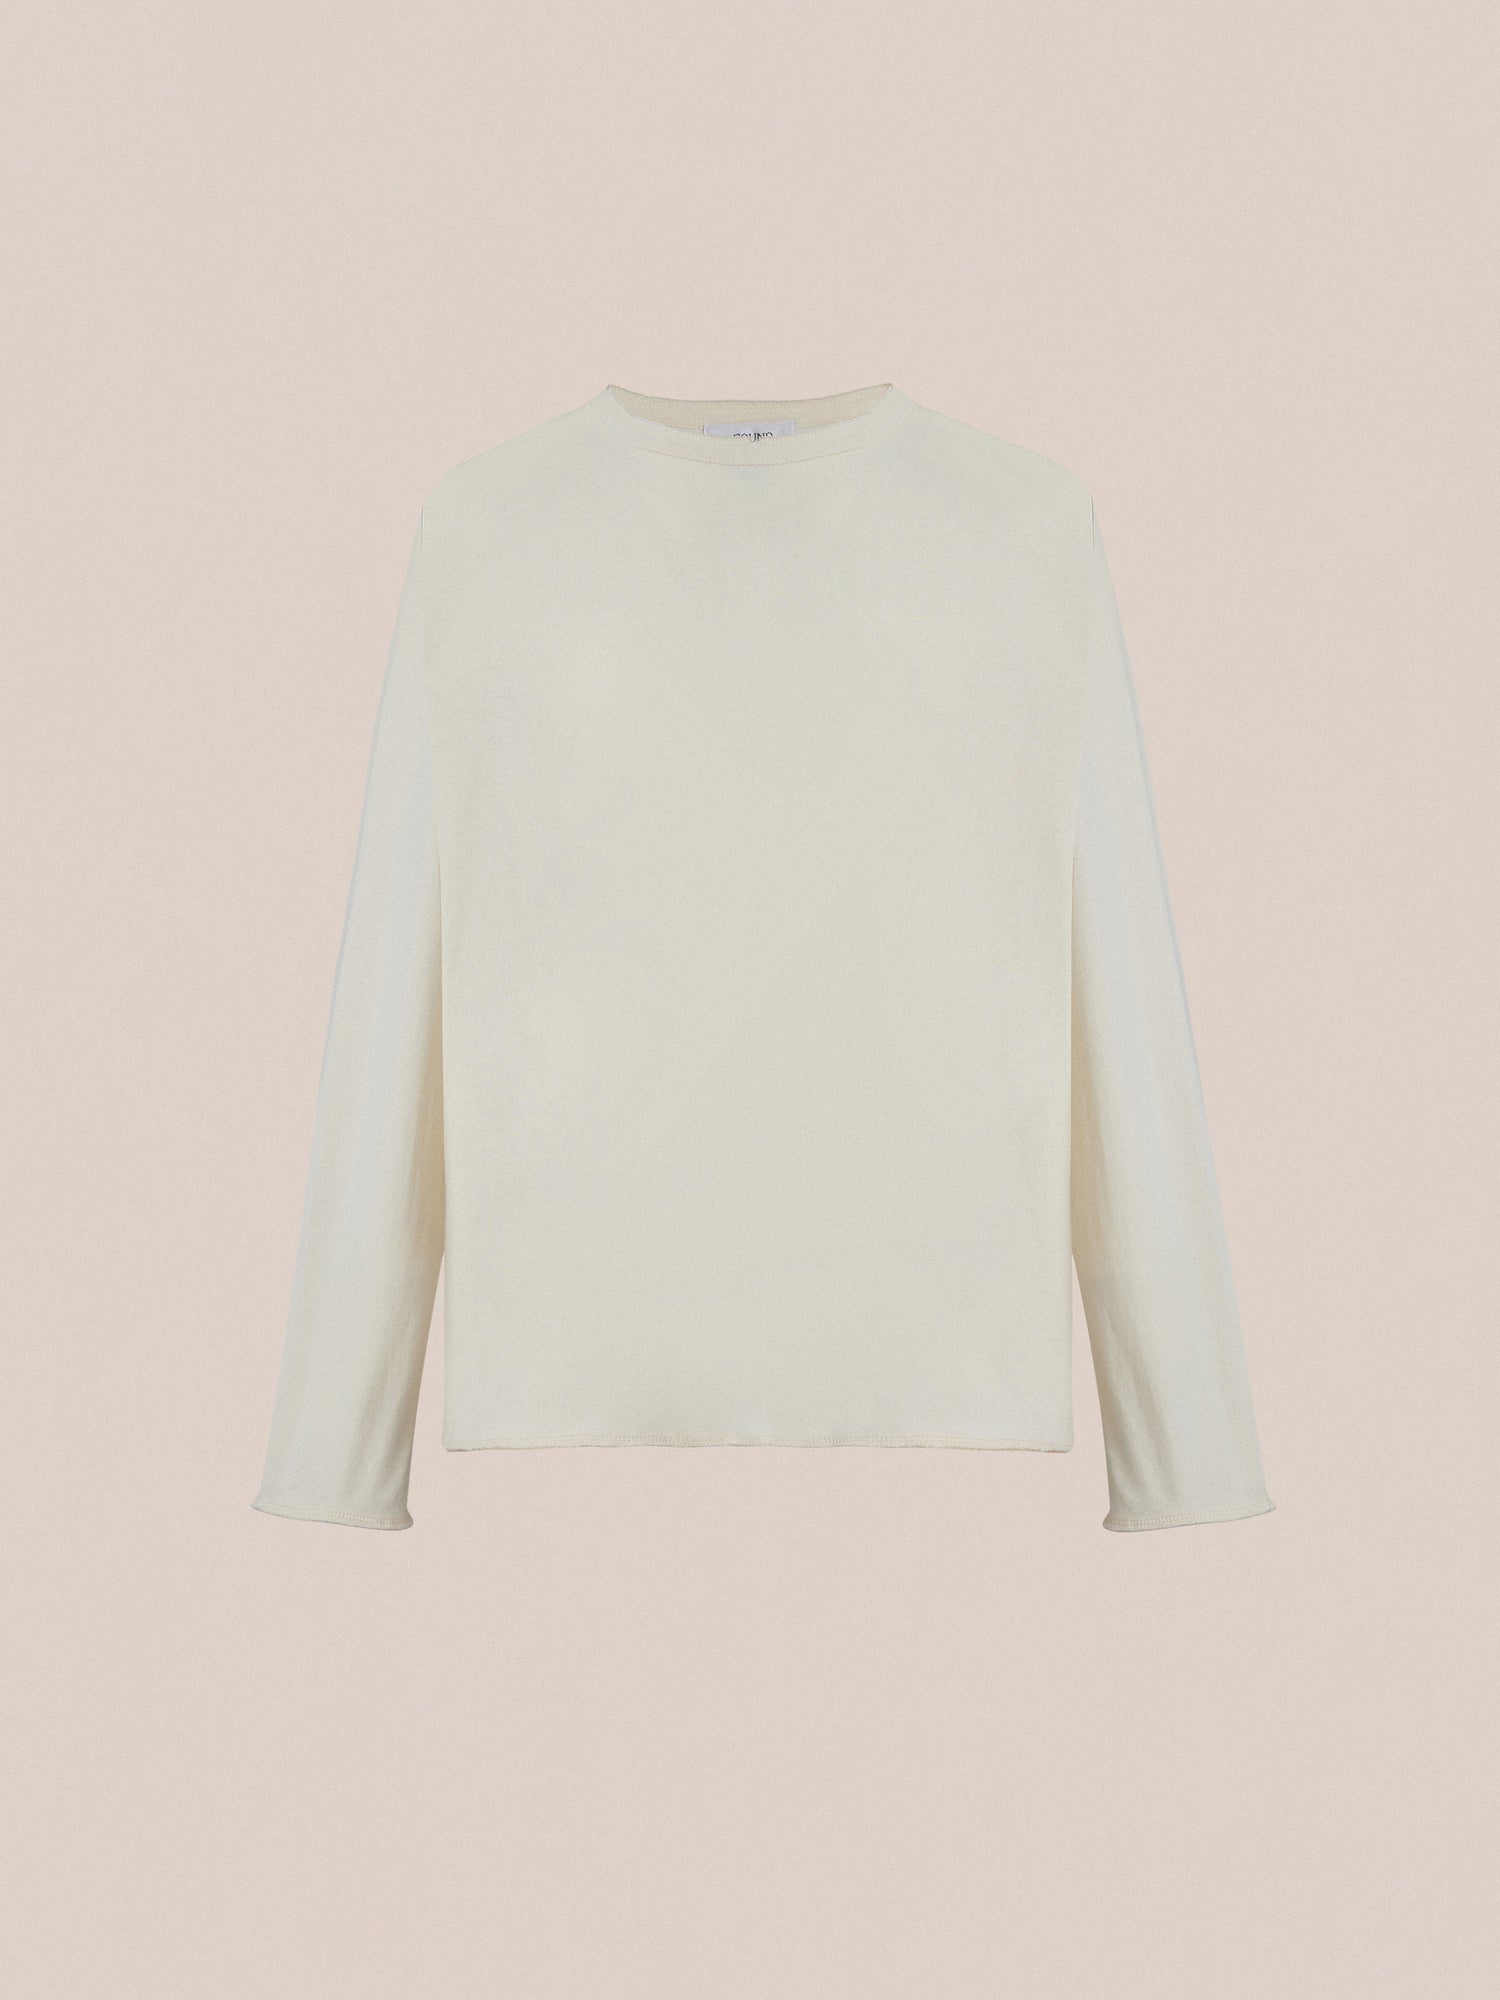 The long-sleeved cream Reversed LS Tee with reversed seams by Profound.